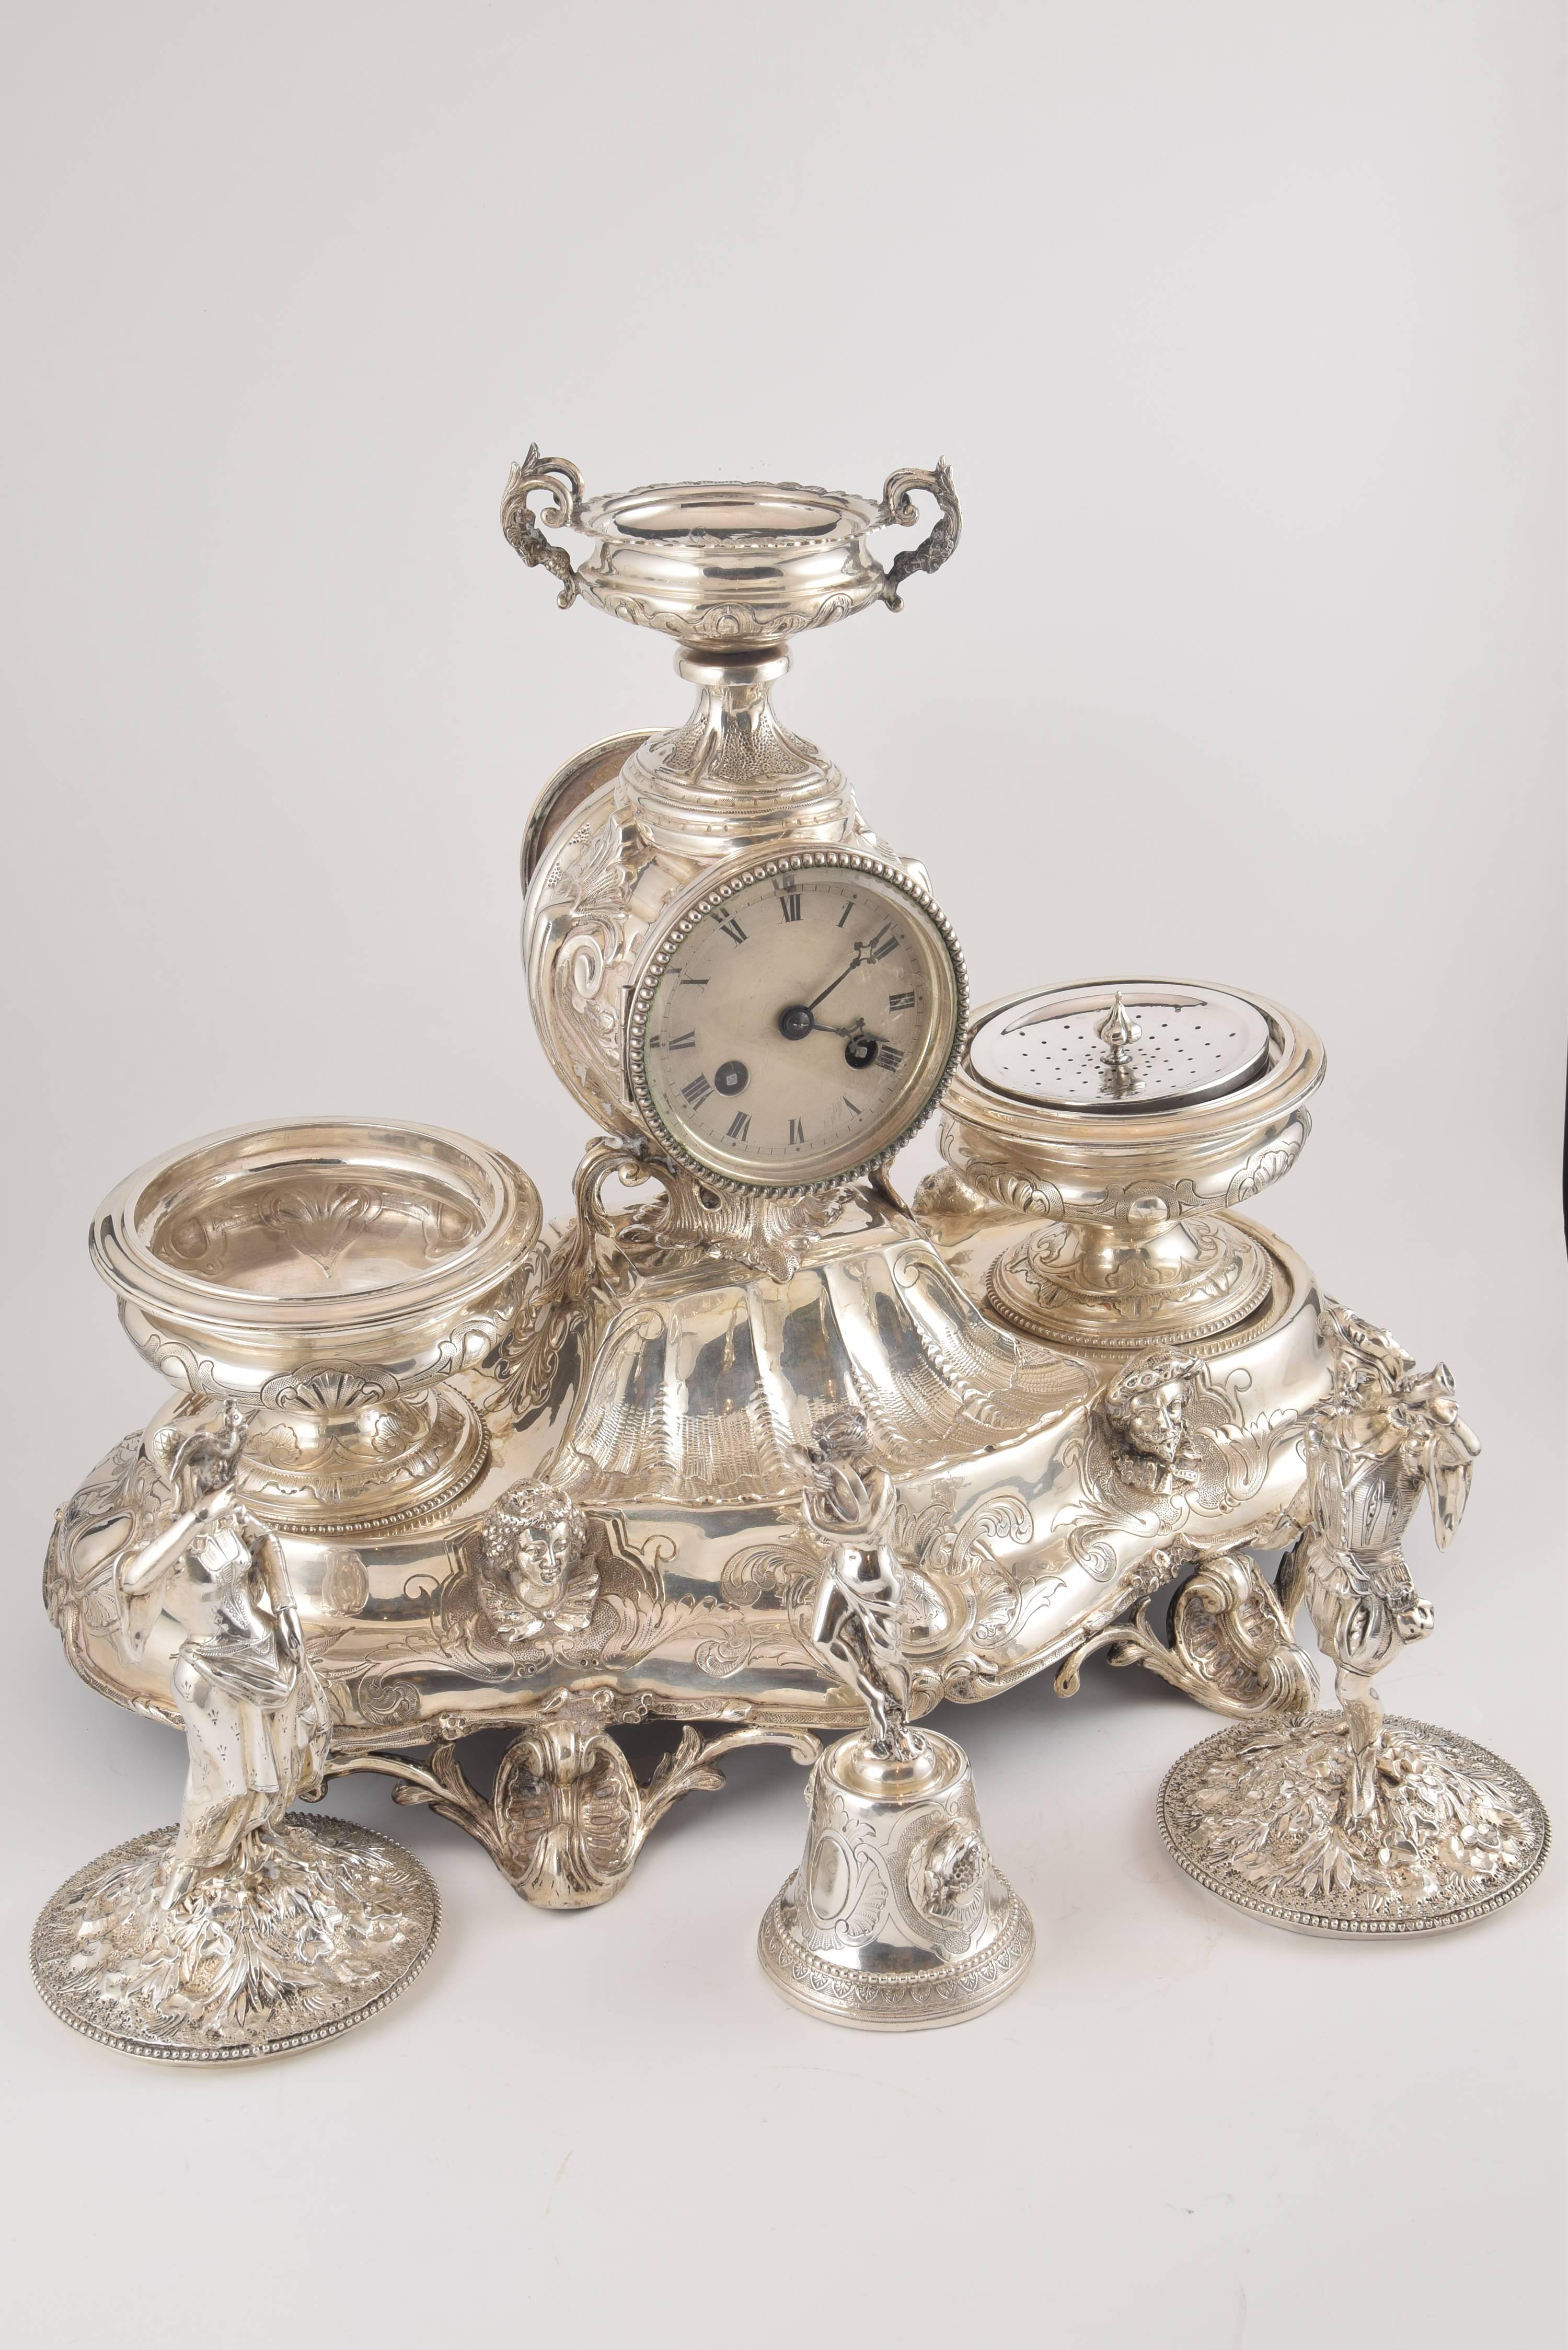 French Solid Silver Writing Set with Clock, France, 19th Century with Hallmarks